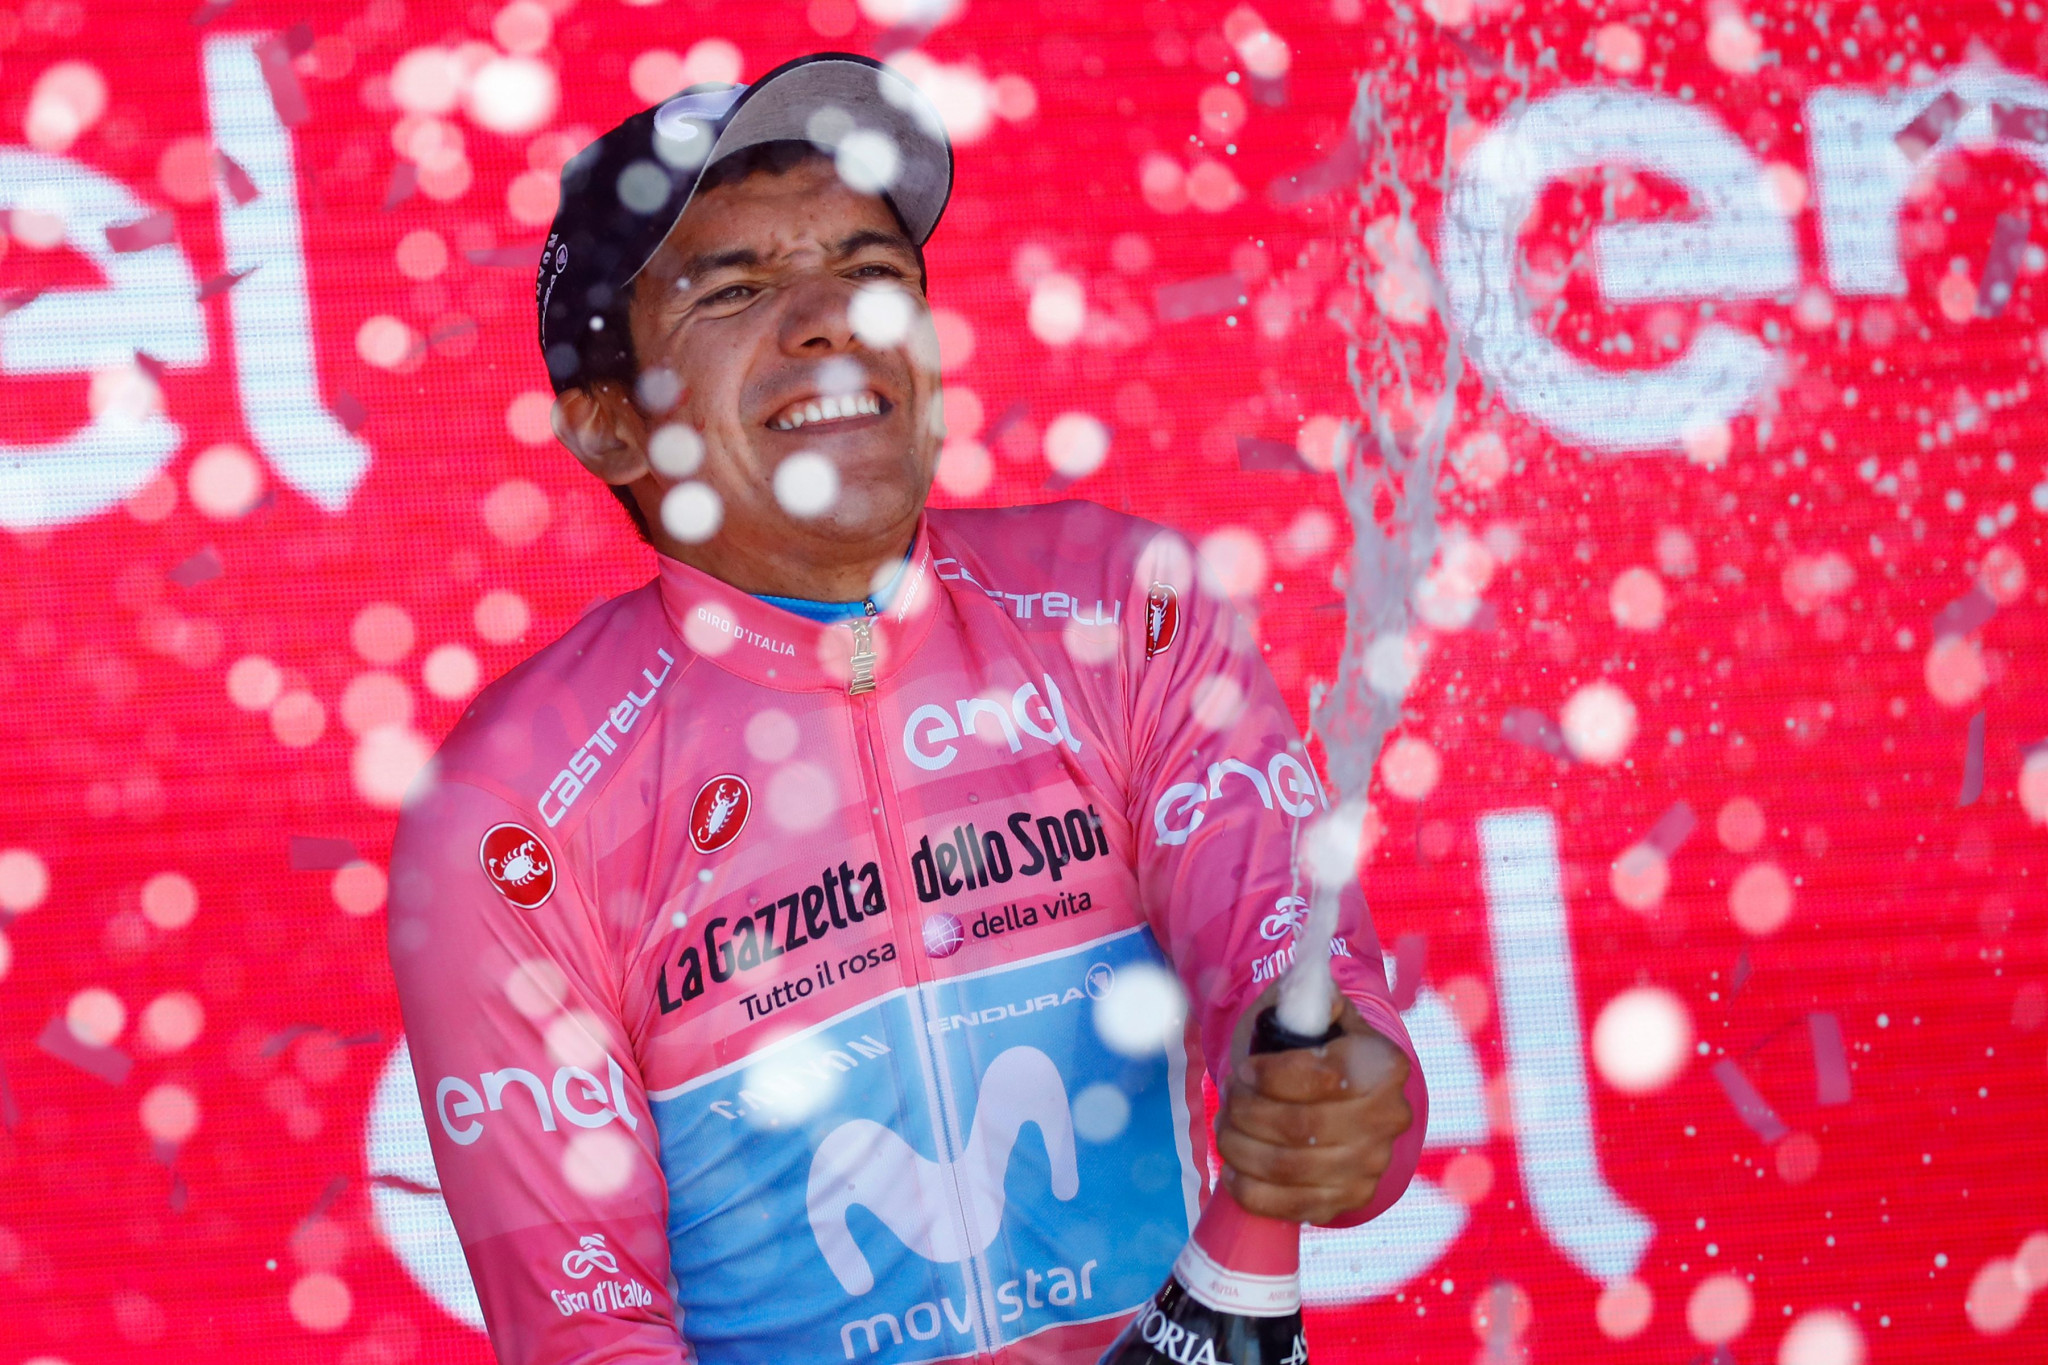 Carapaz becomes first Ecuadorian to win Giro D'Italia after final time trial